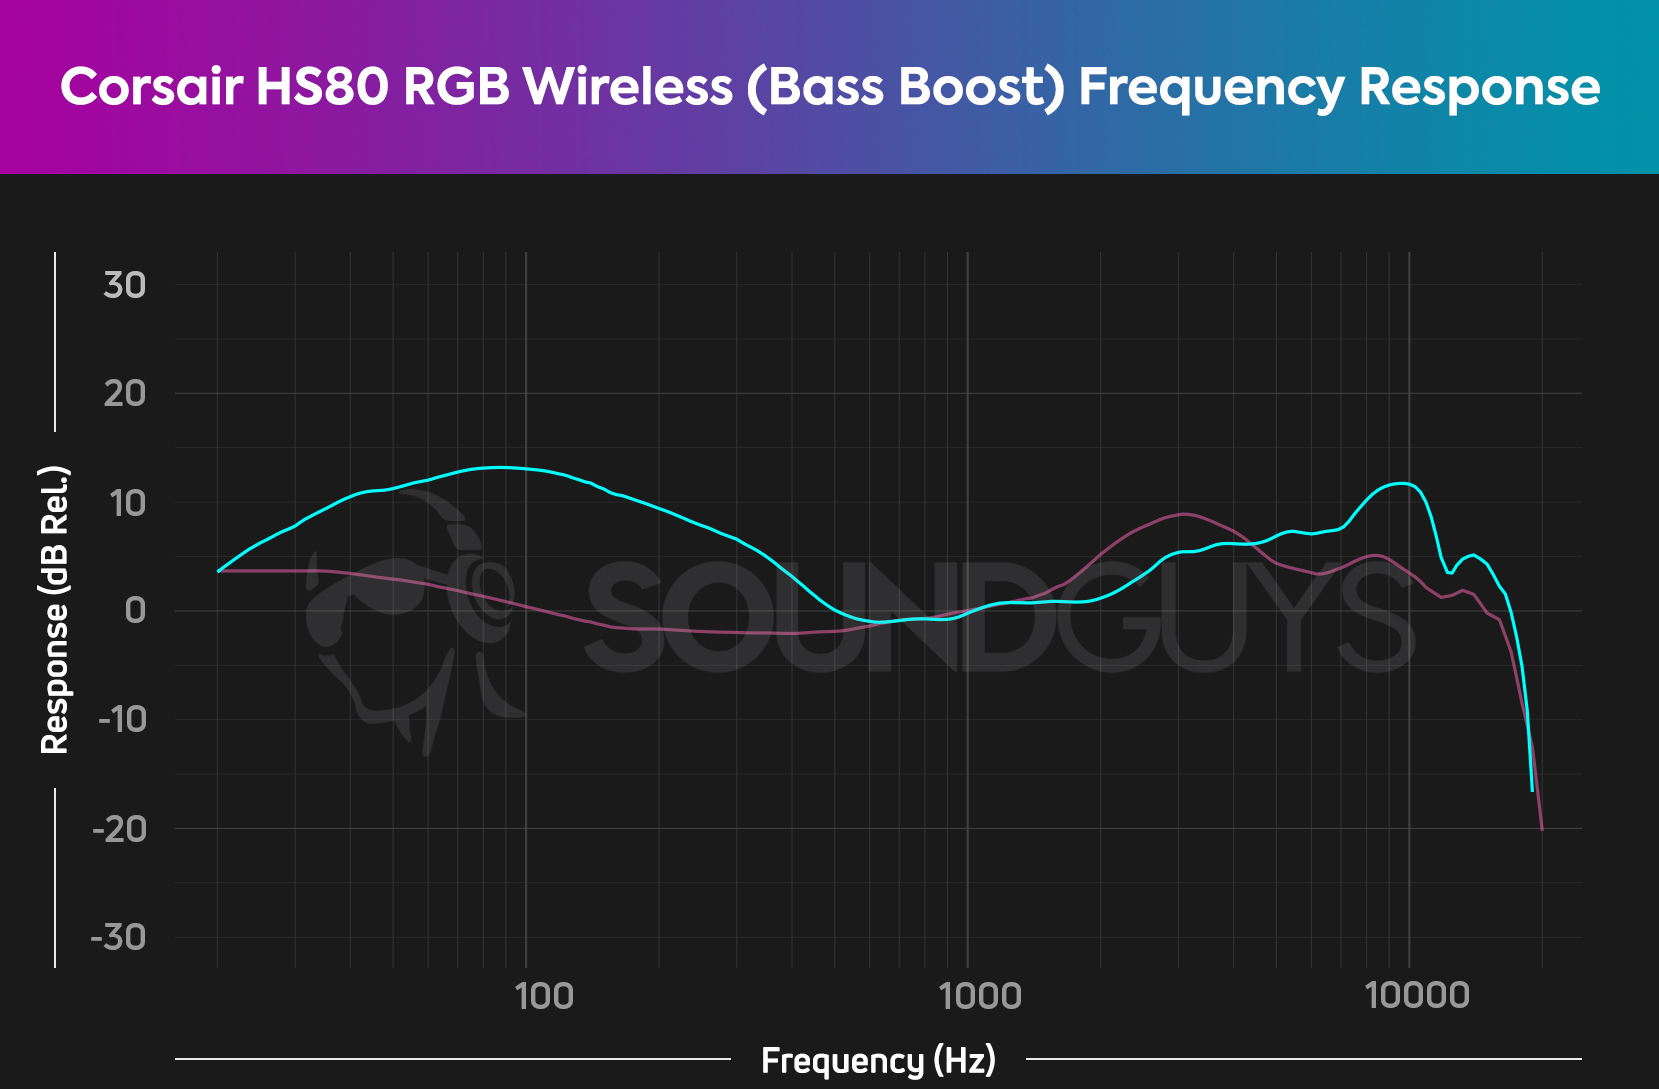 A frequency response chart for the Corsair HS80 RGB Wireless gaming headset Bass Boost audio preset, which shows bass boosted to a huge degree.